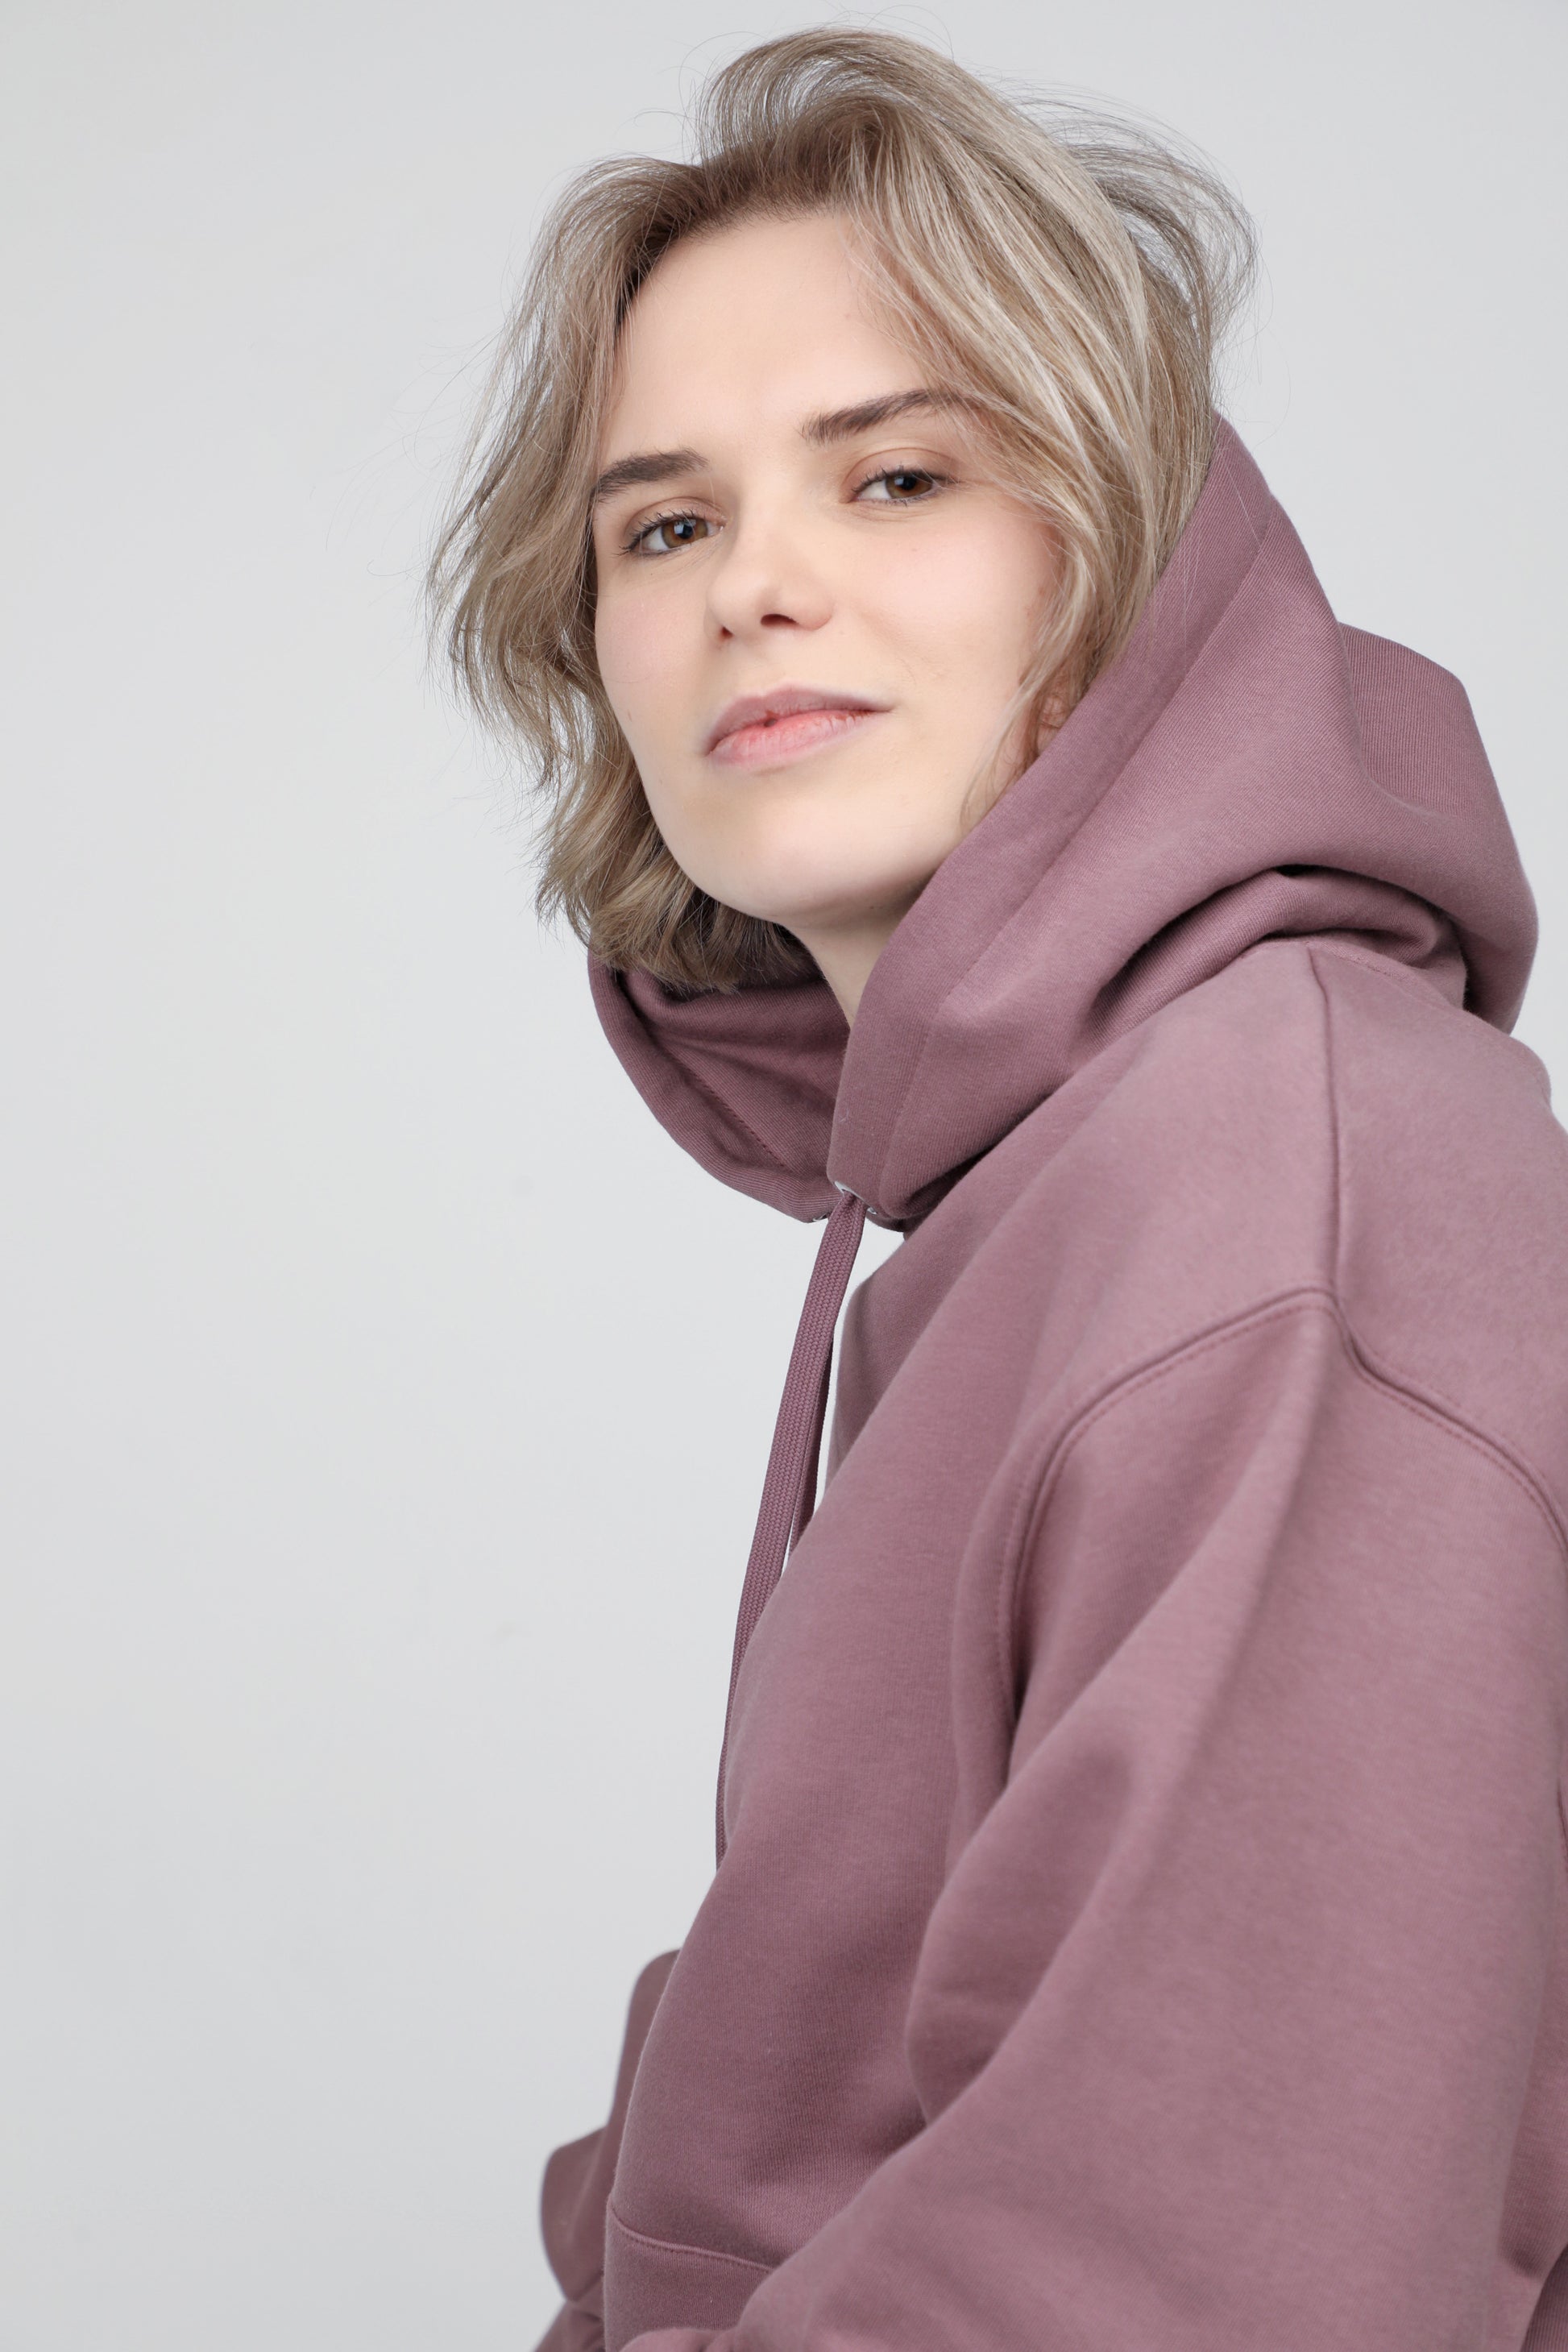 Cosy dog | Hoodie with dog. Oversize fit | Unisex by My Wild Other